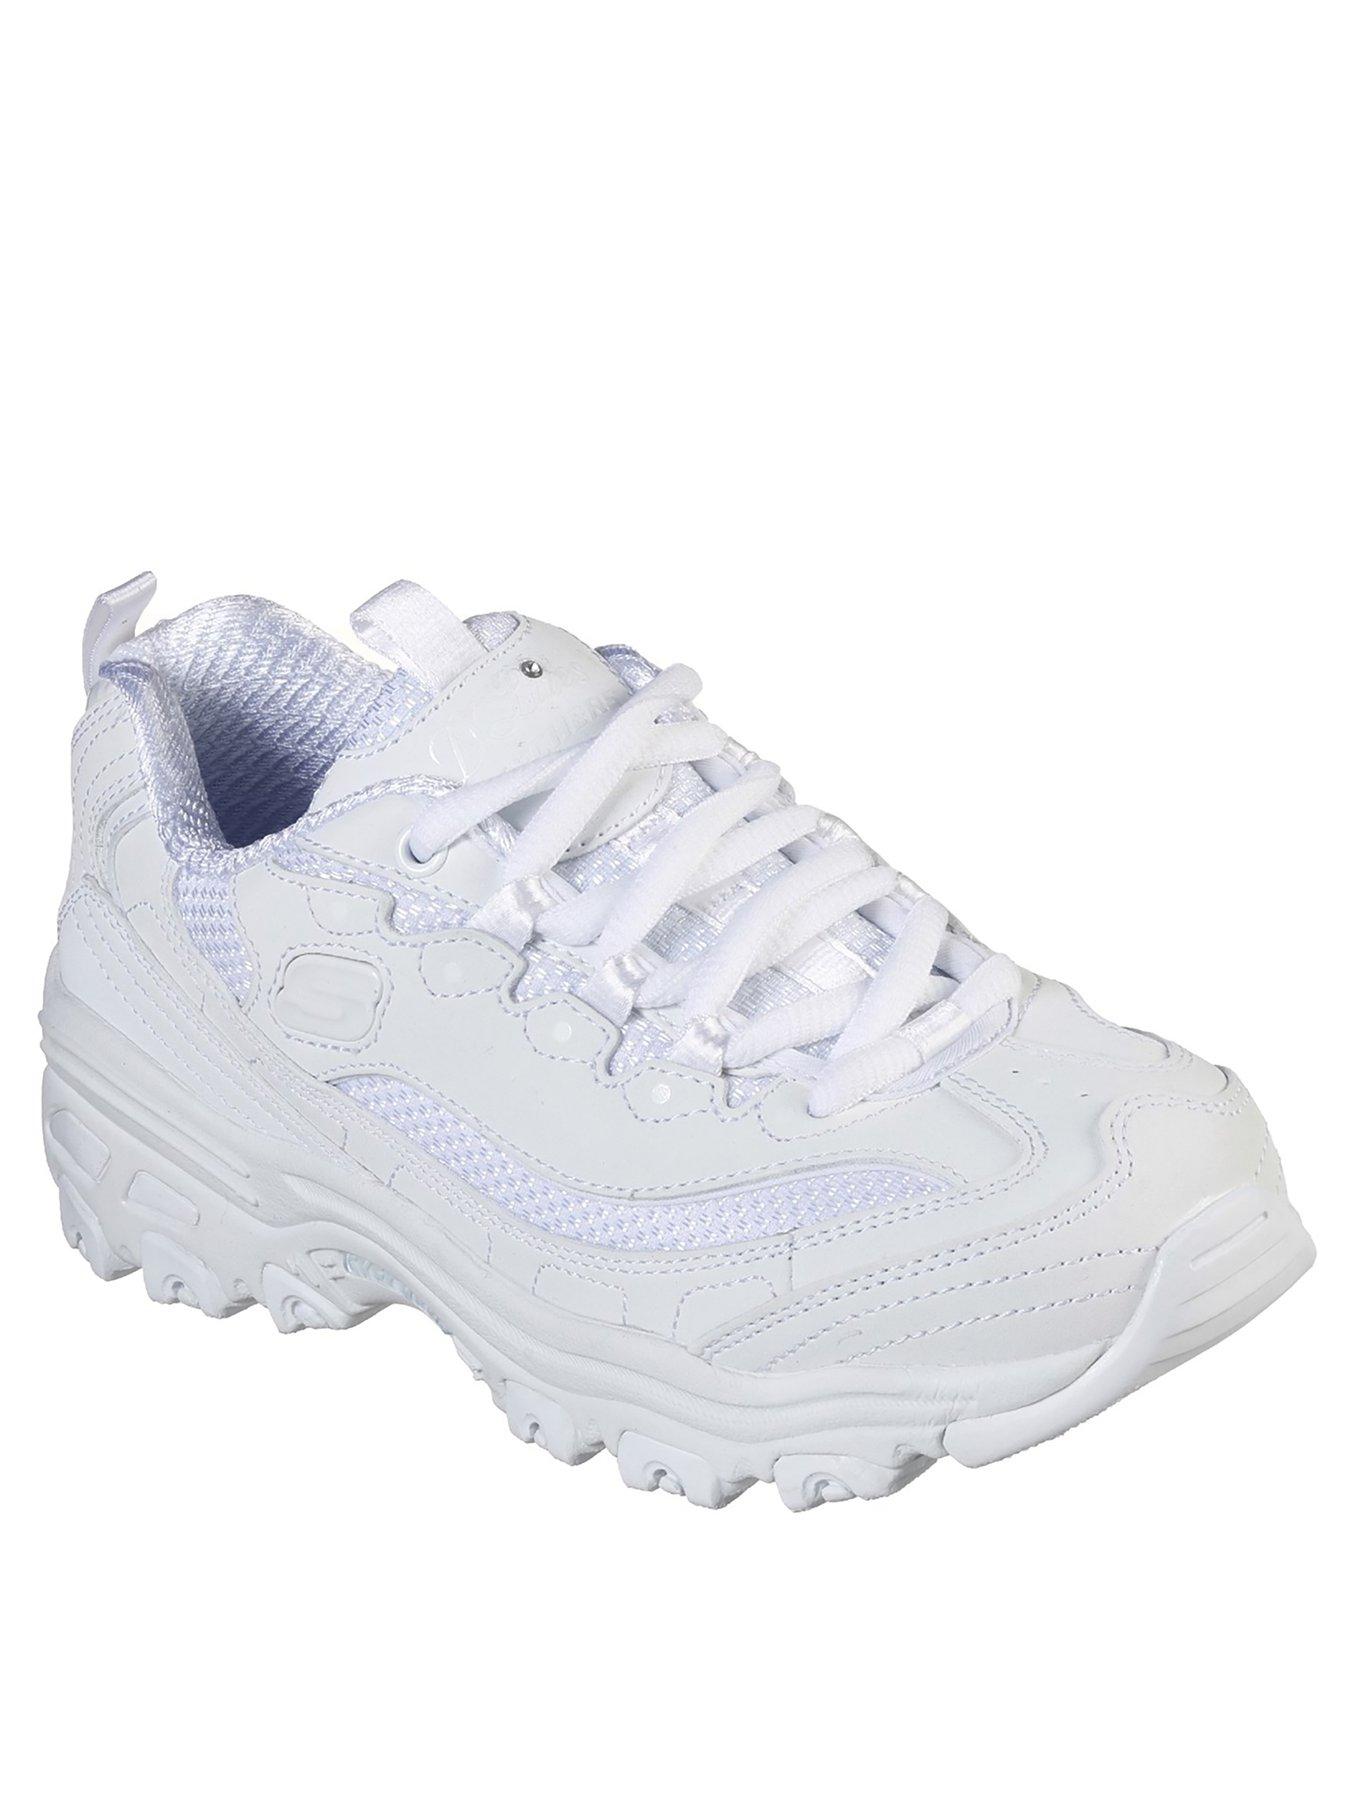 Trainer Shoes Brand New Skechers D Lites Black White Grey Chunky ...